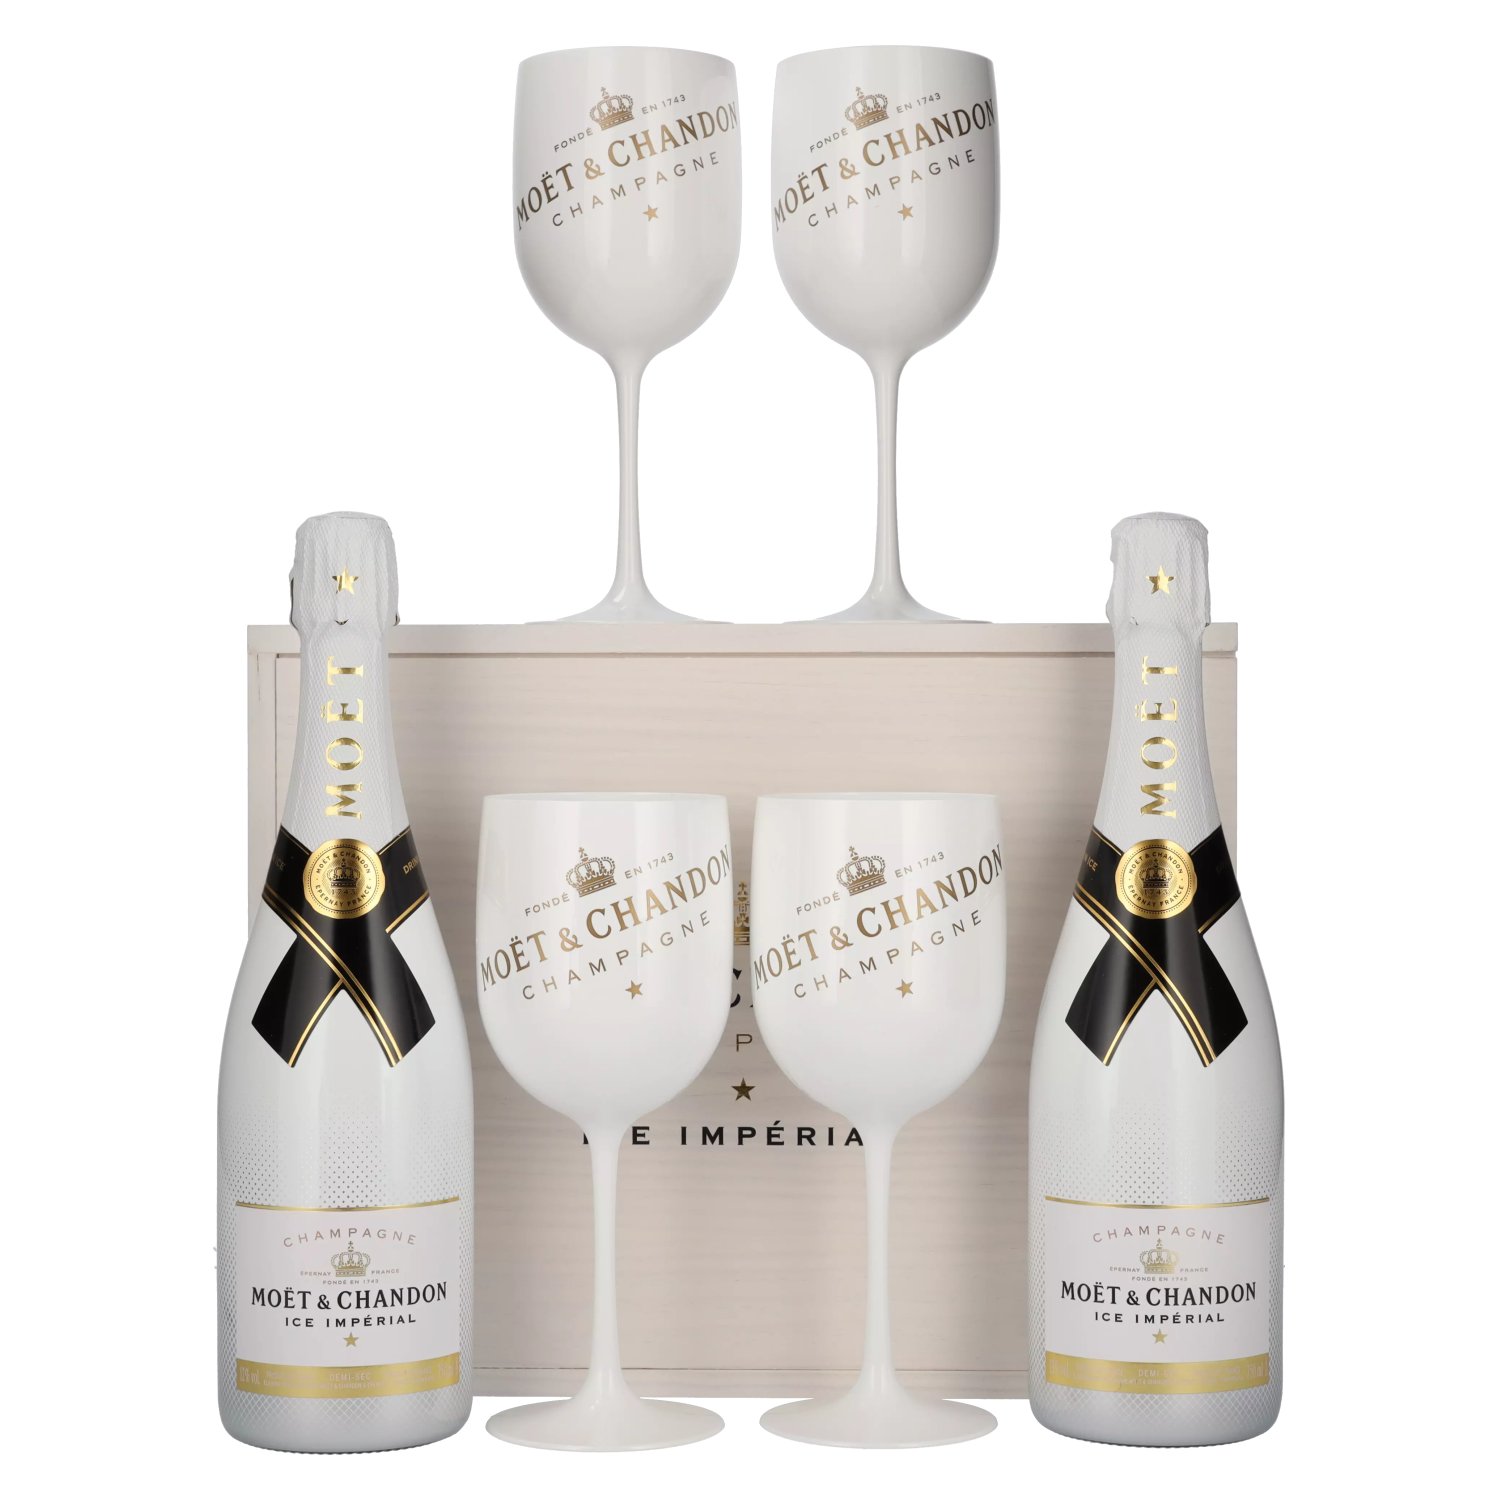 2 Moet & Chandon Ice Imperial Glasses White Qty